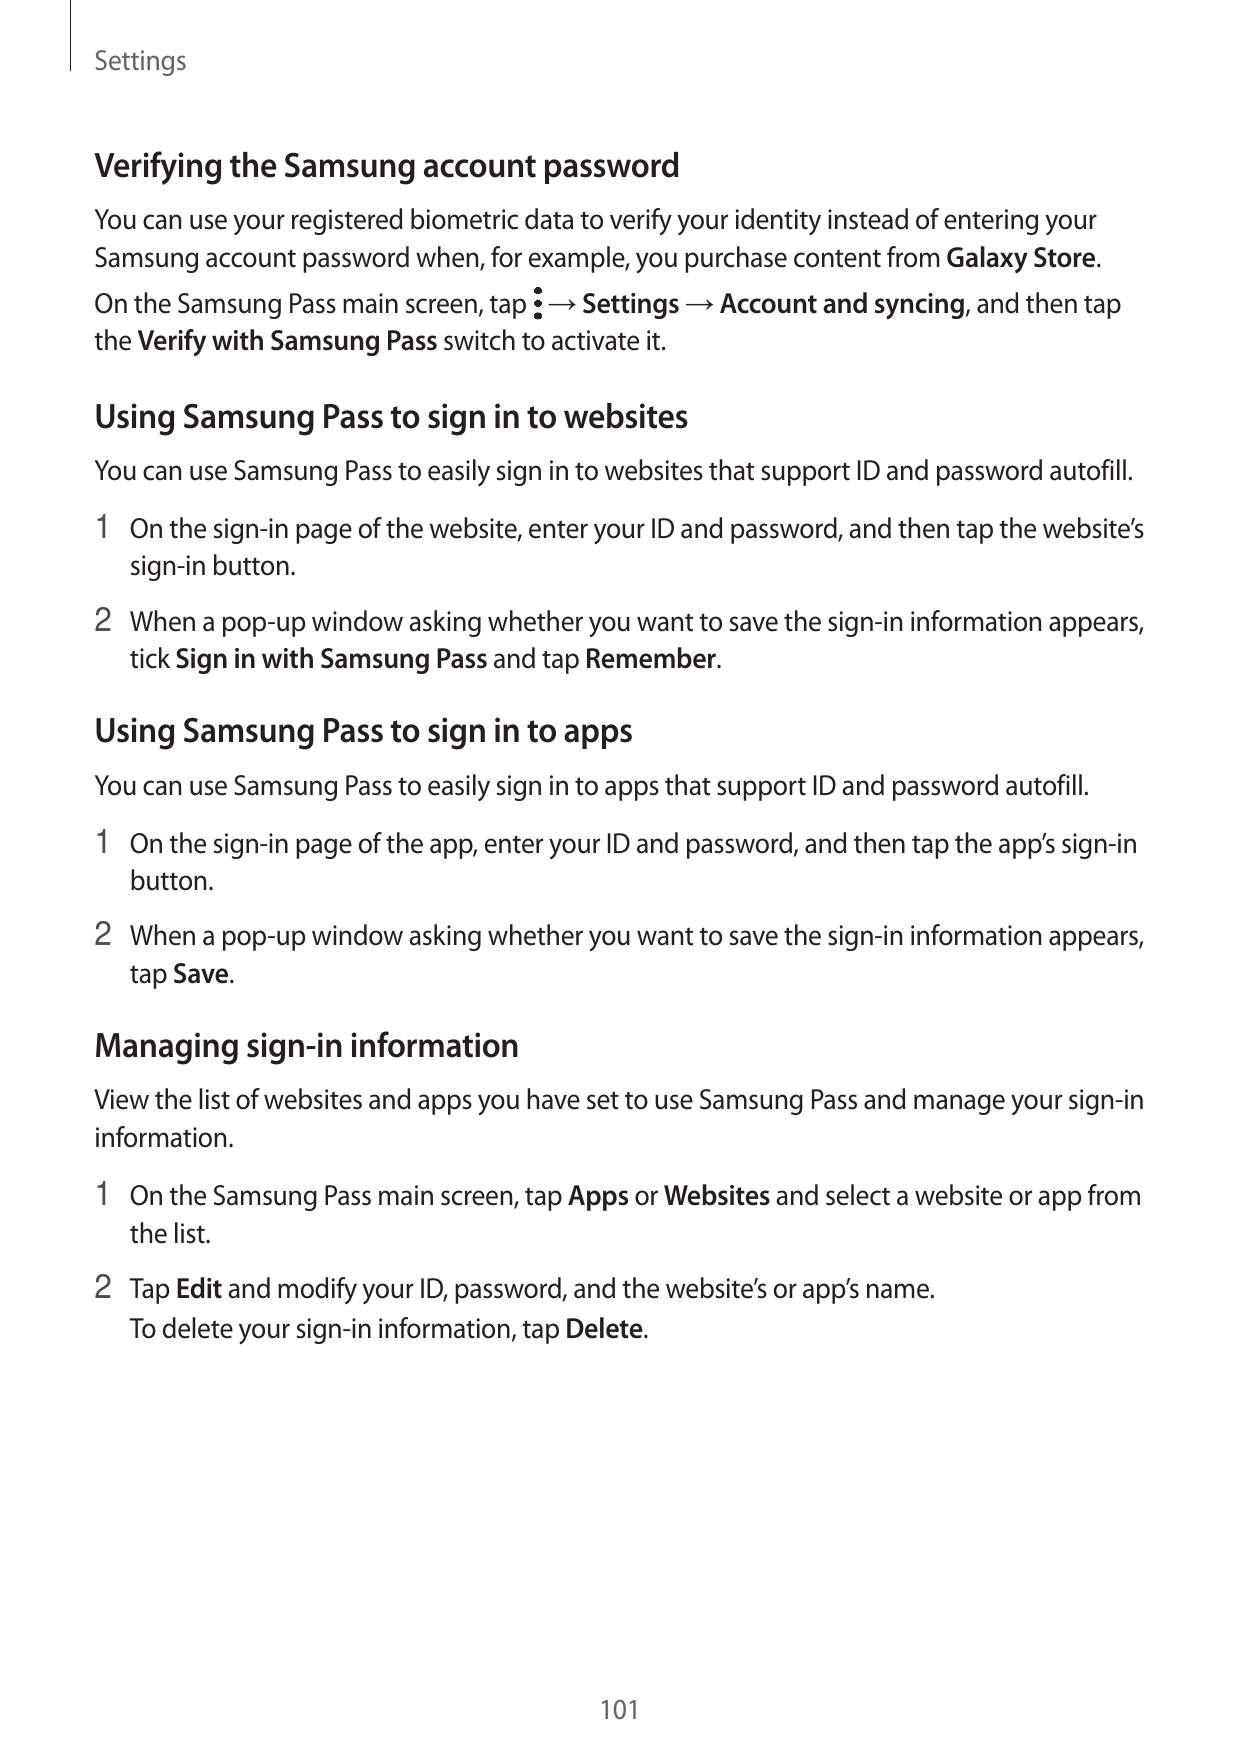 SettingsVerifying the Samsung account passwordYou can use your registered biometric data to verify your identity instead of ente